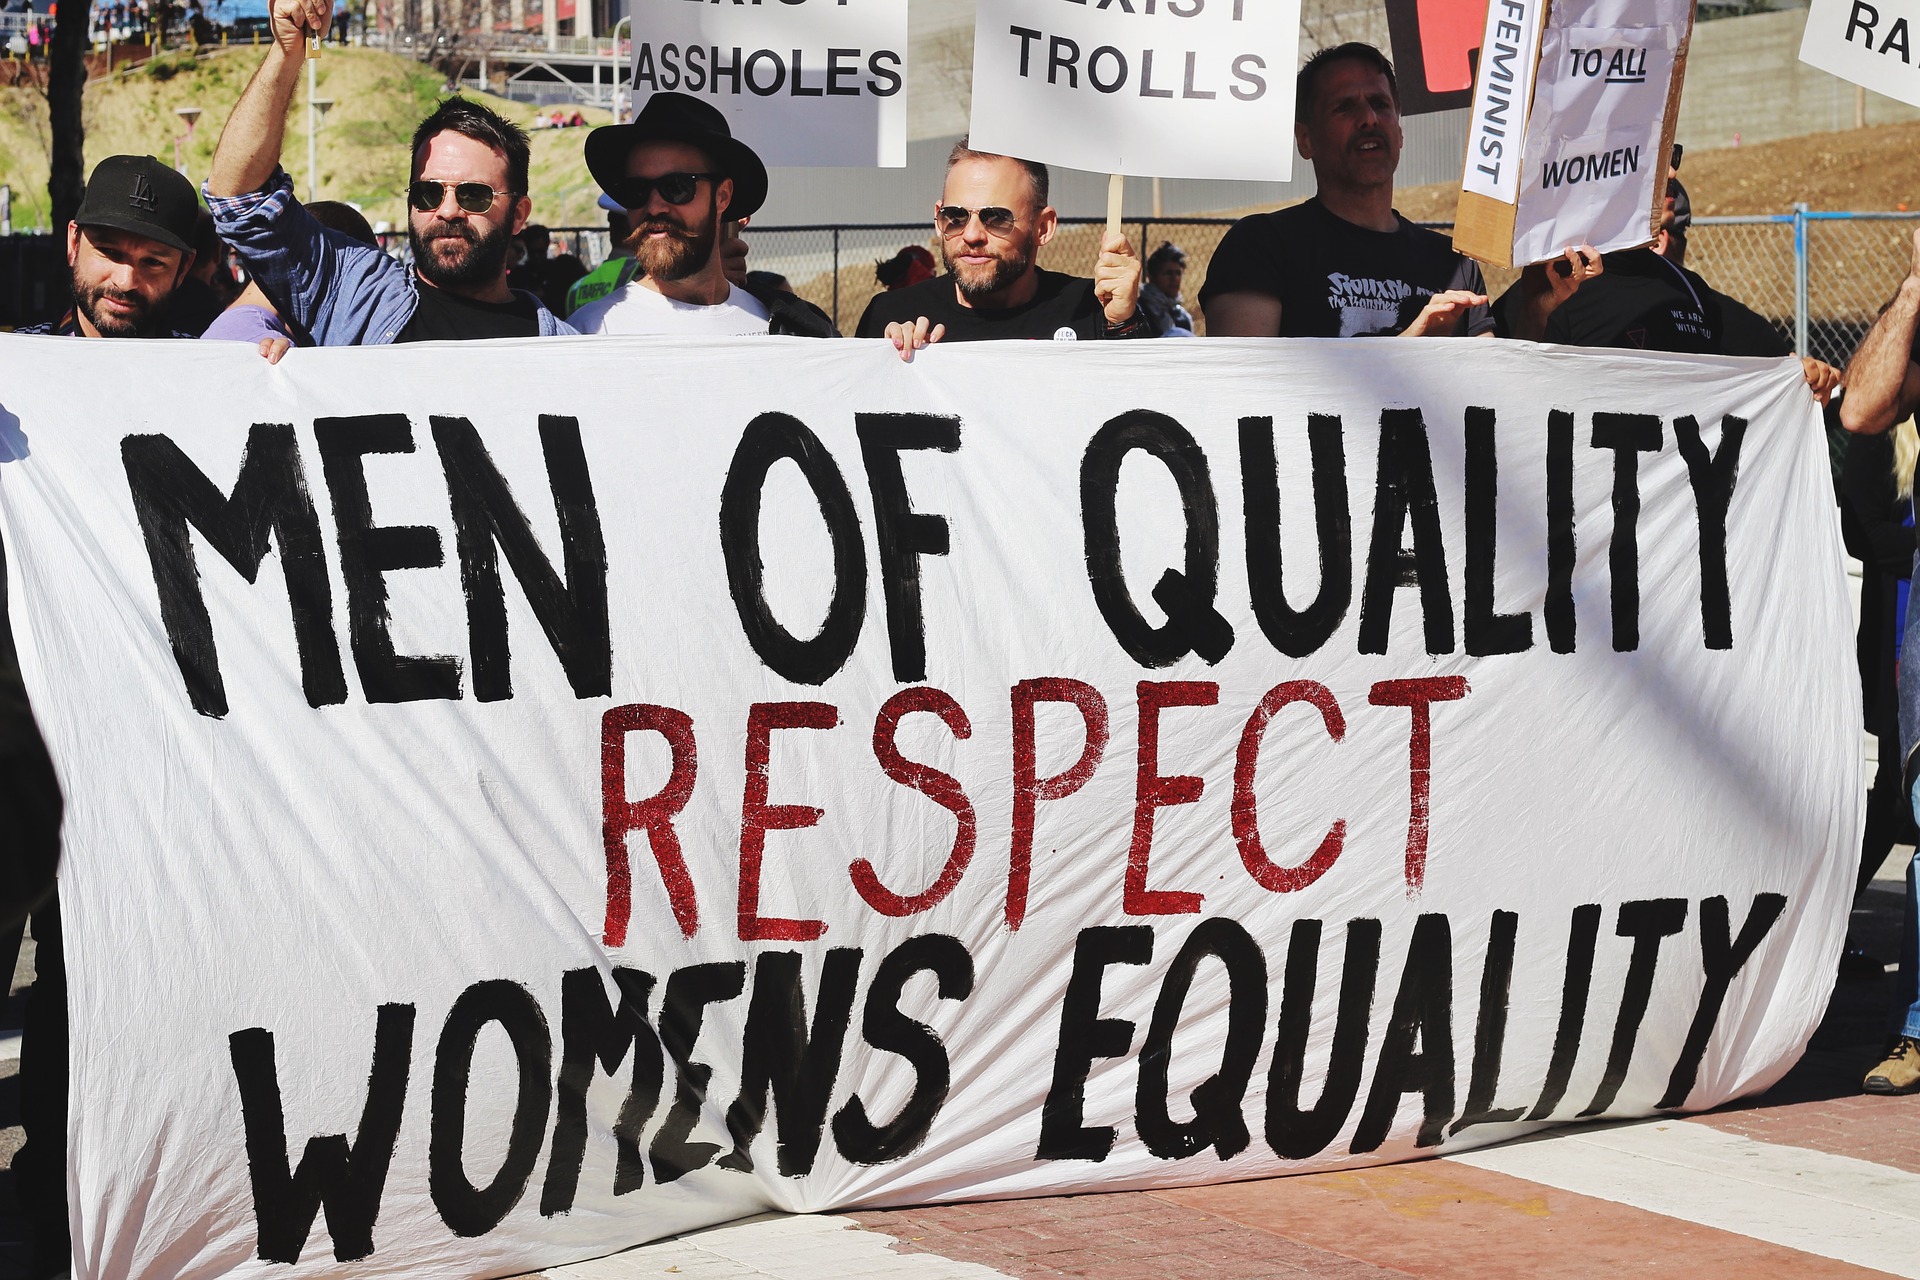 Protest sign, "men respect women's equality"